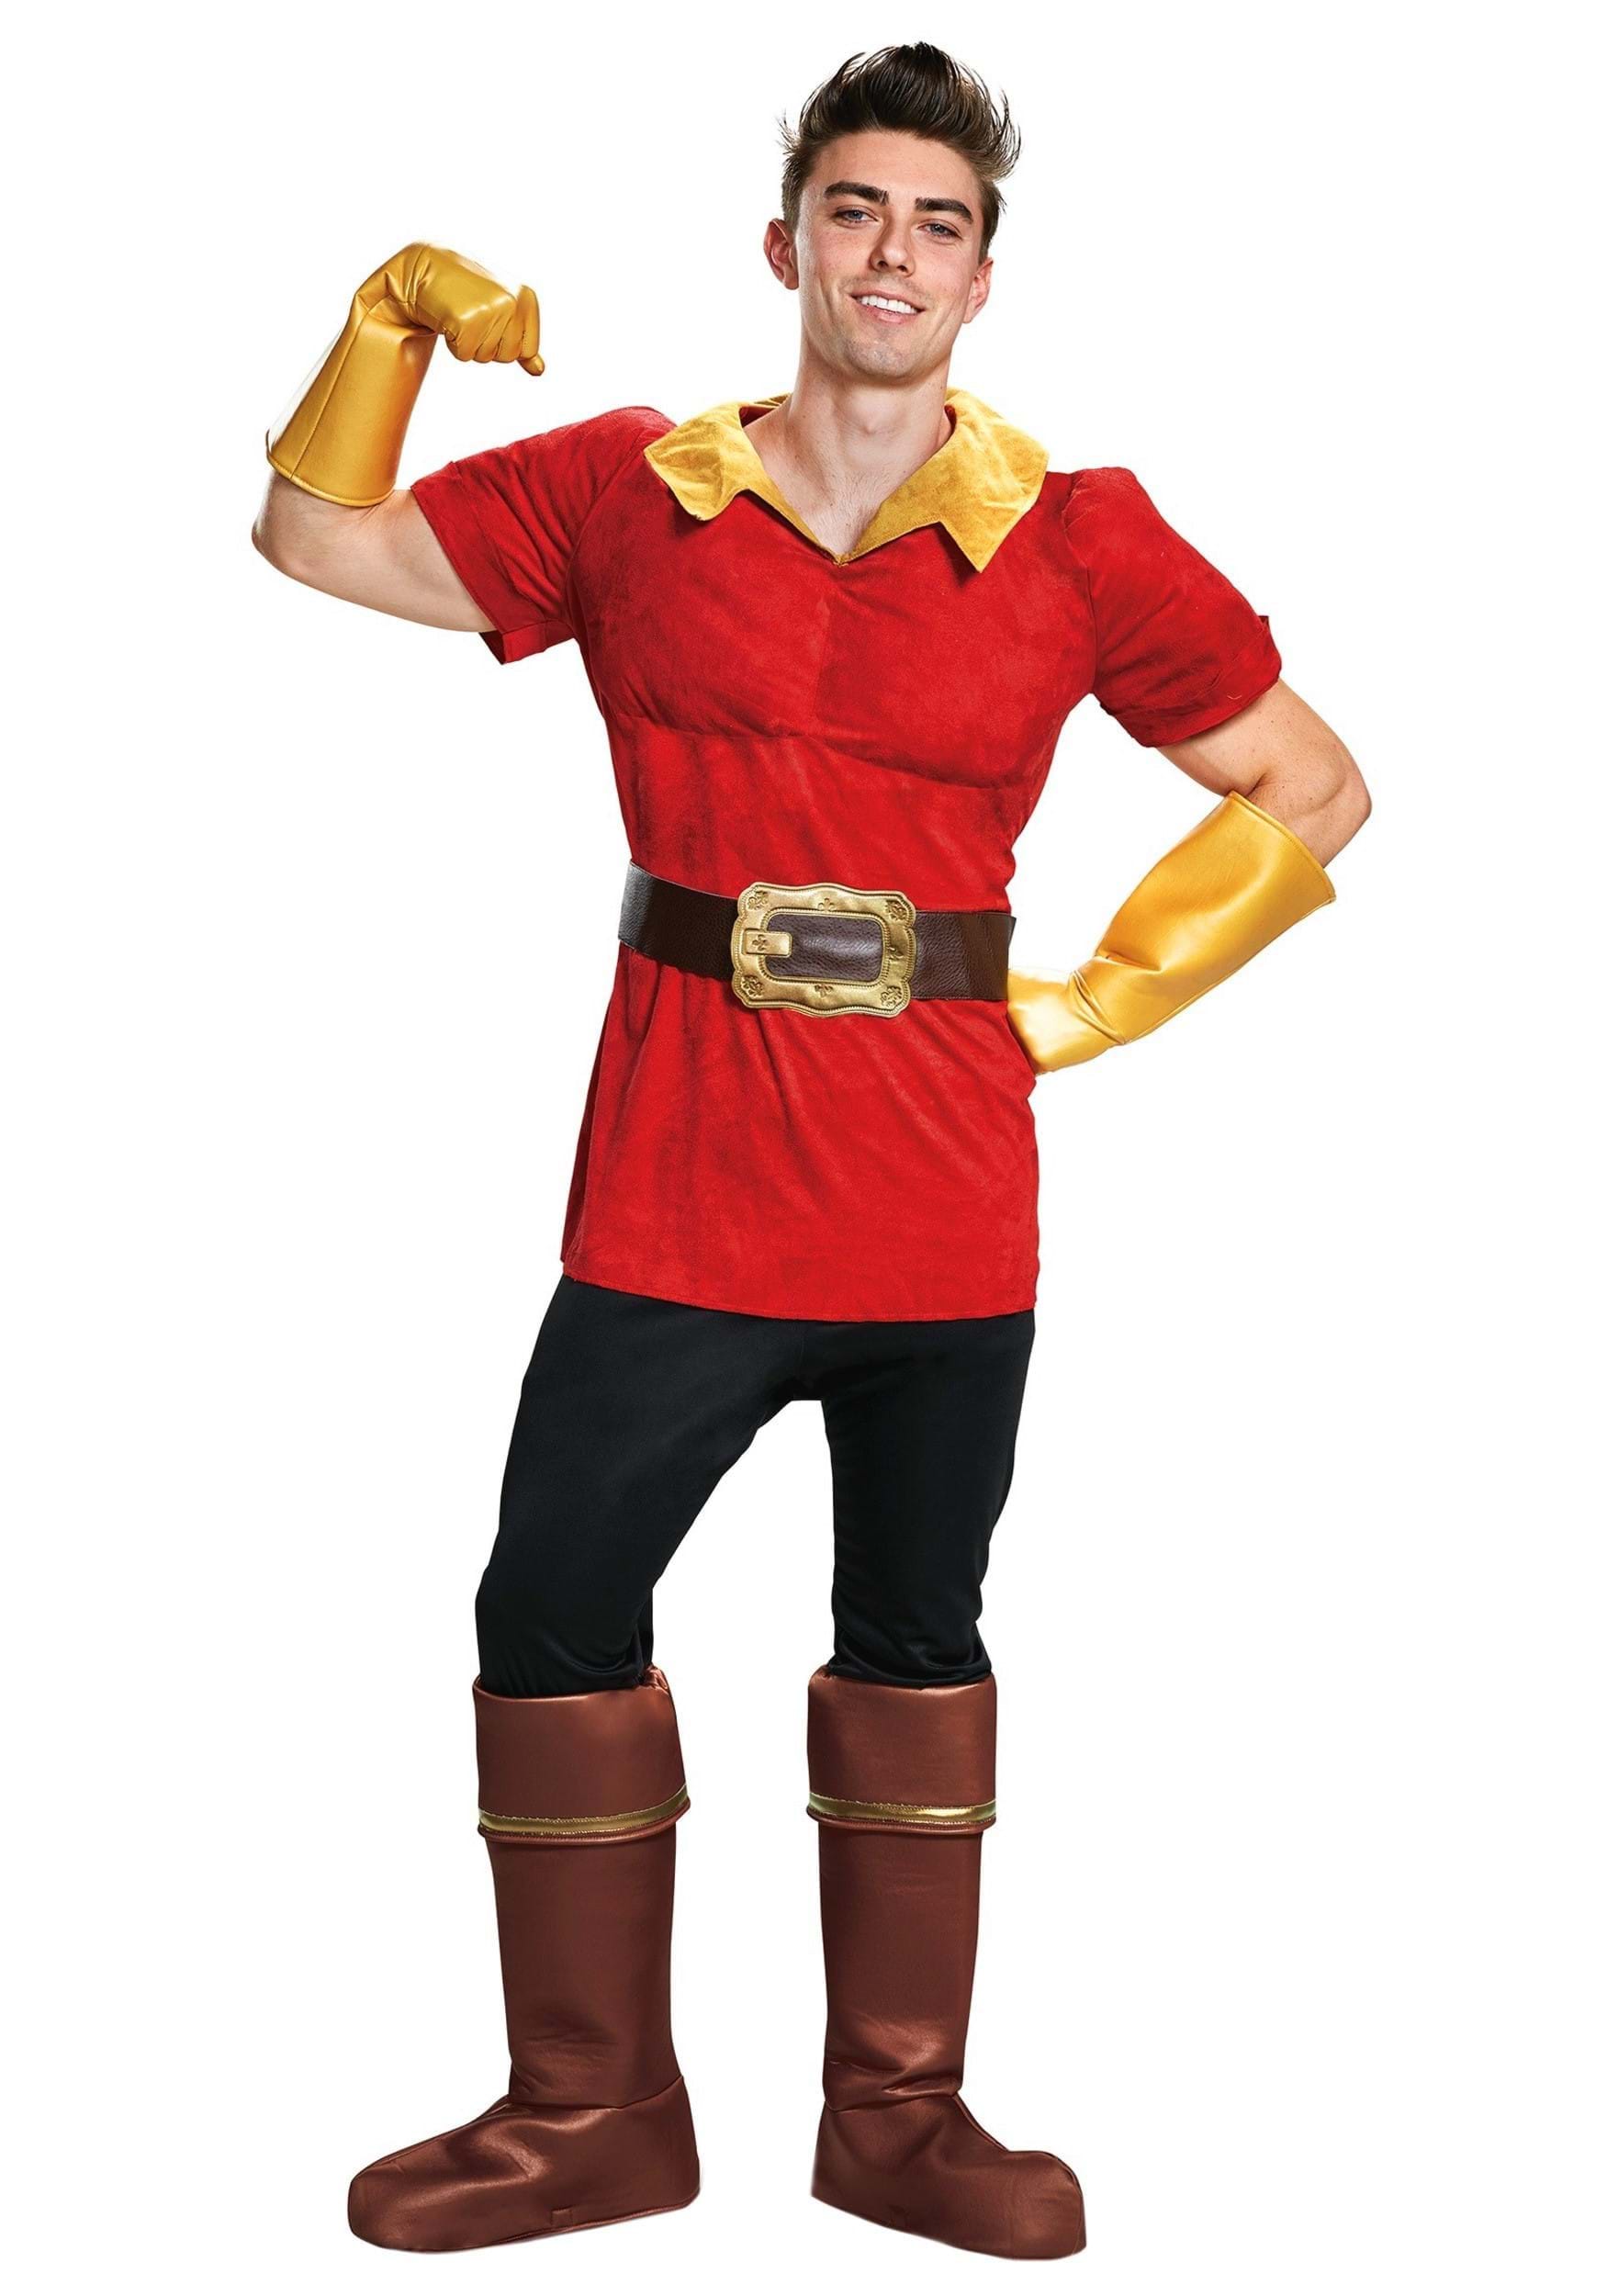 Image of Disney Beauty and the Beast Gaston Costume for Men ID DI79933-XL